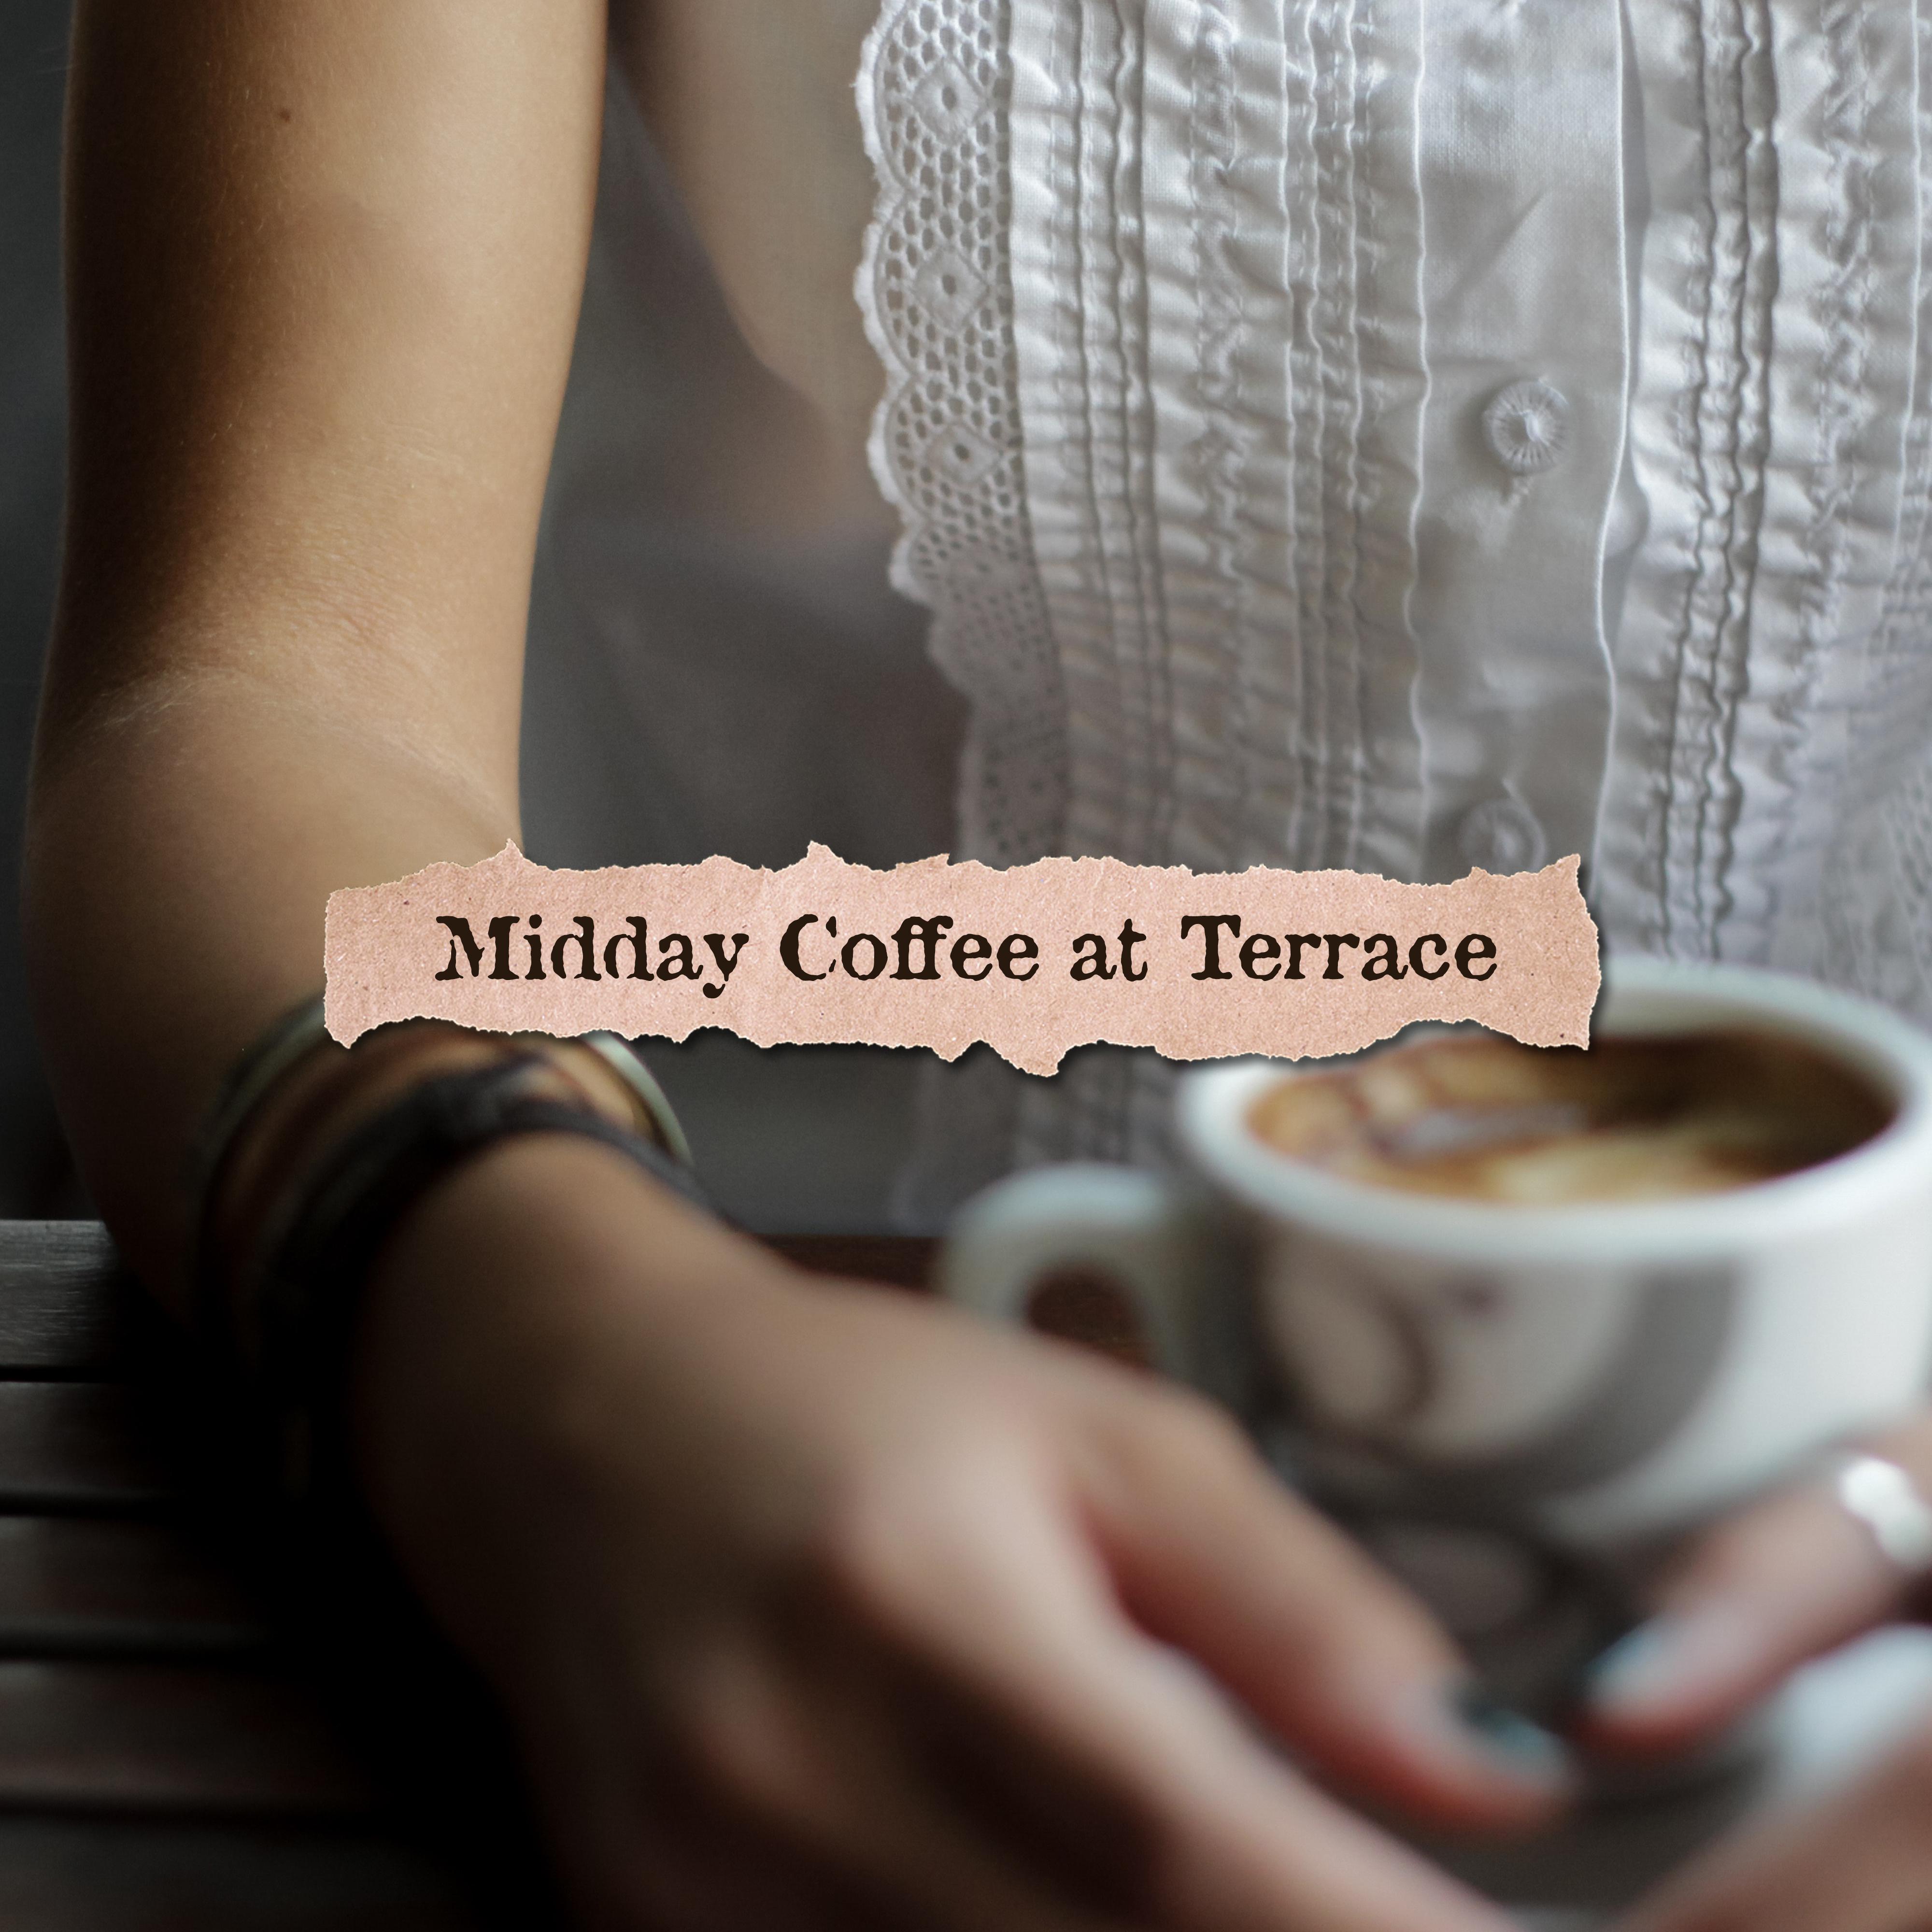 Midday Coffee at Terrace: 15 Soft Instrumental Jazz 2019 Songs for Total Relax & Spend Good Time with Love